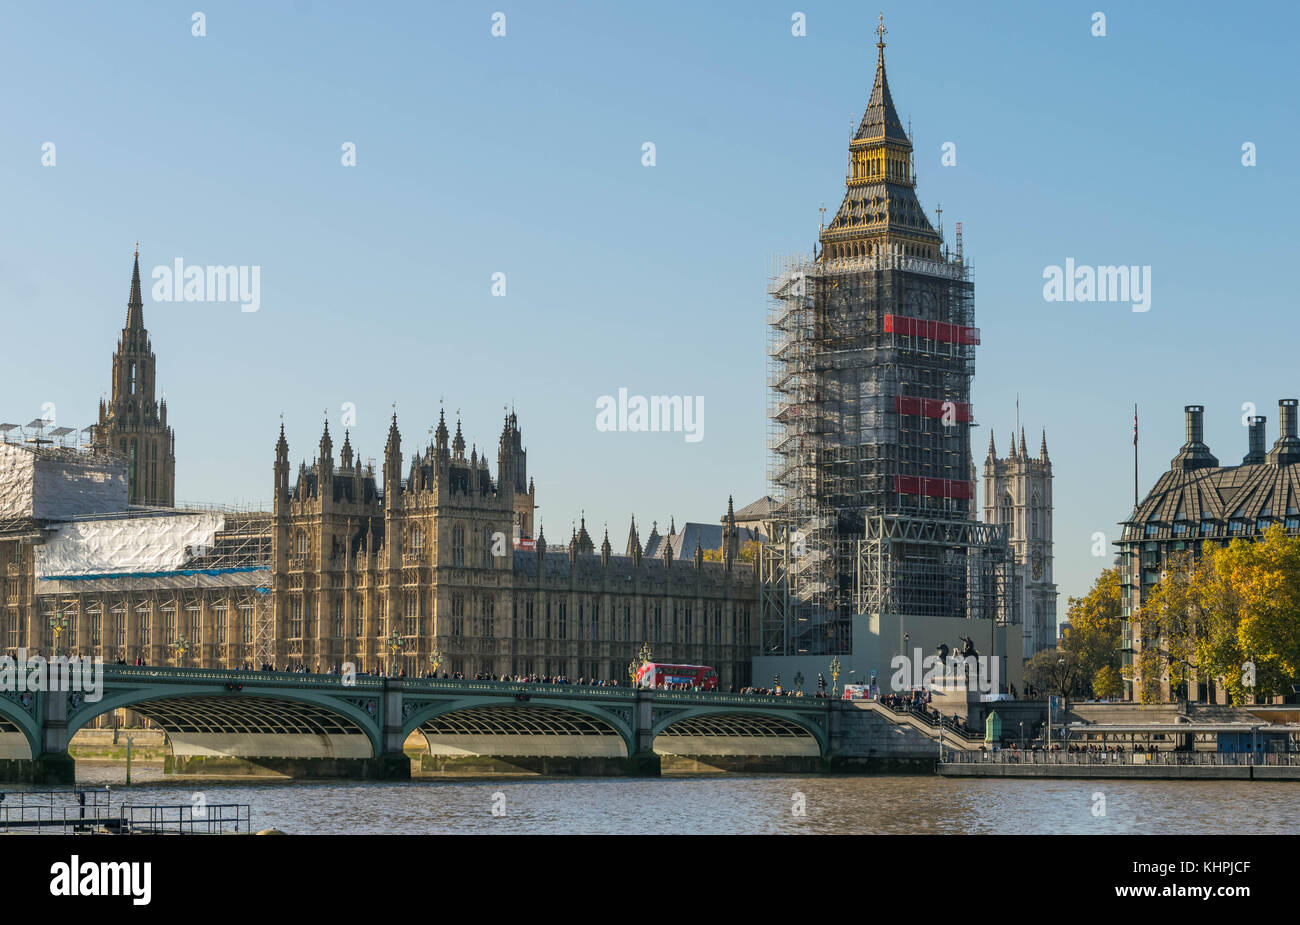 LONDON, UK - October 17th, 2017: Westminster bridge and big ben renovation construction with the house of parliament in view, sunny day, clear sky. Stock Photo